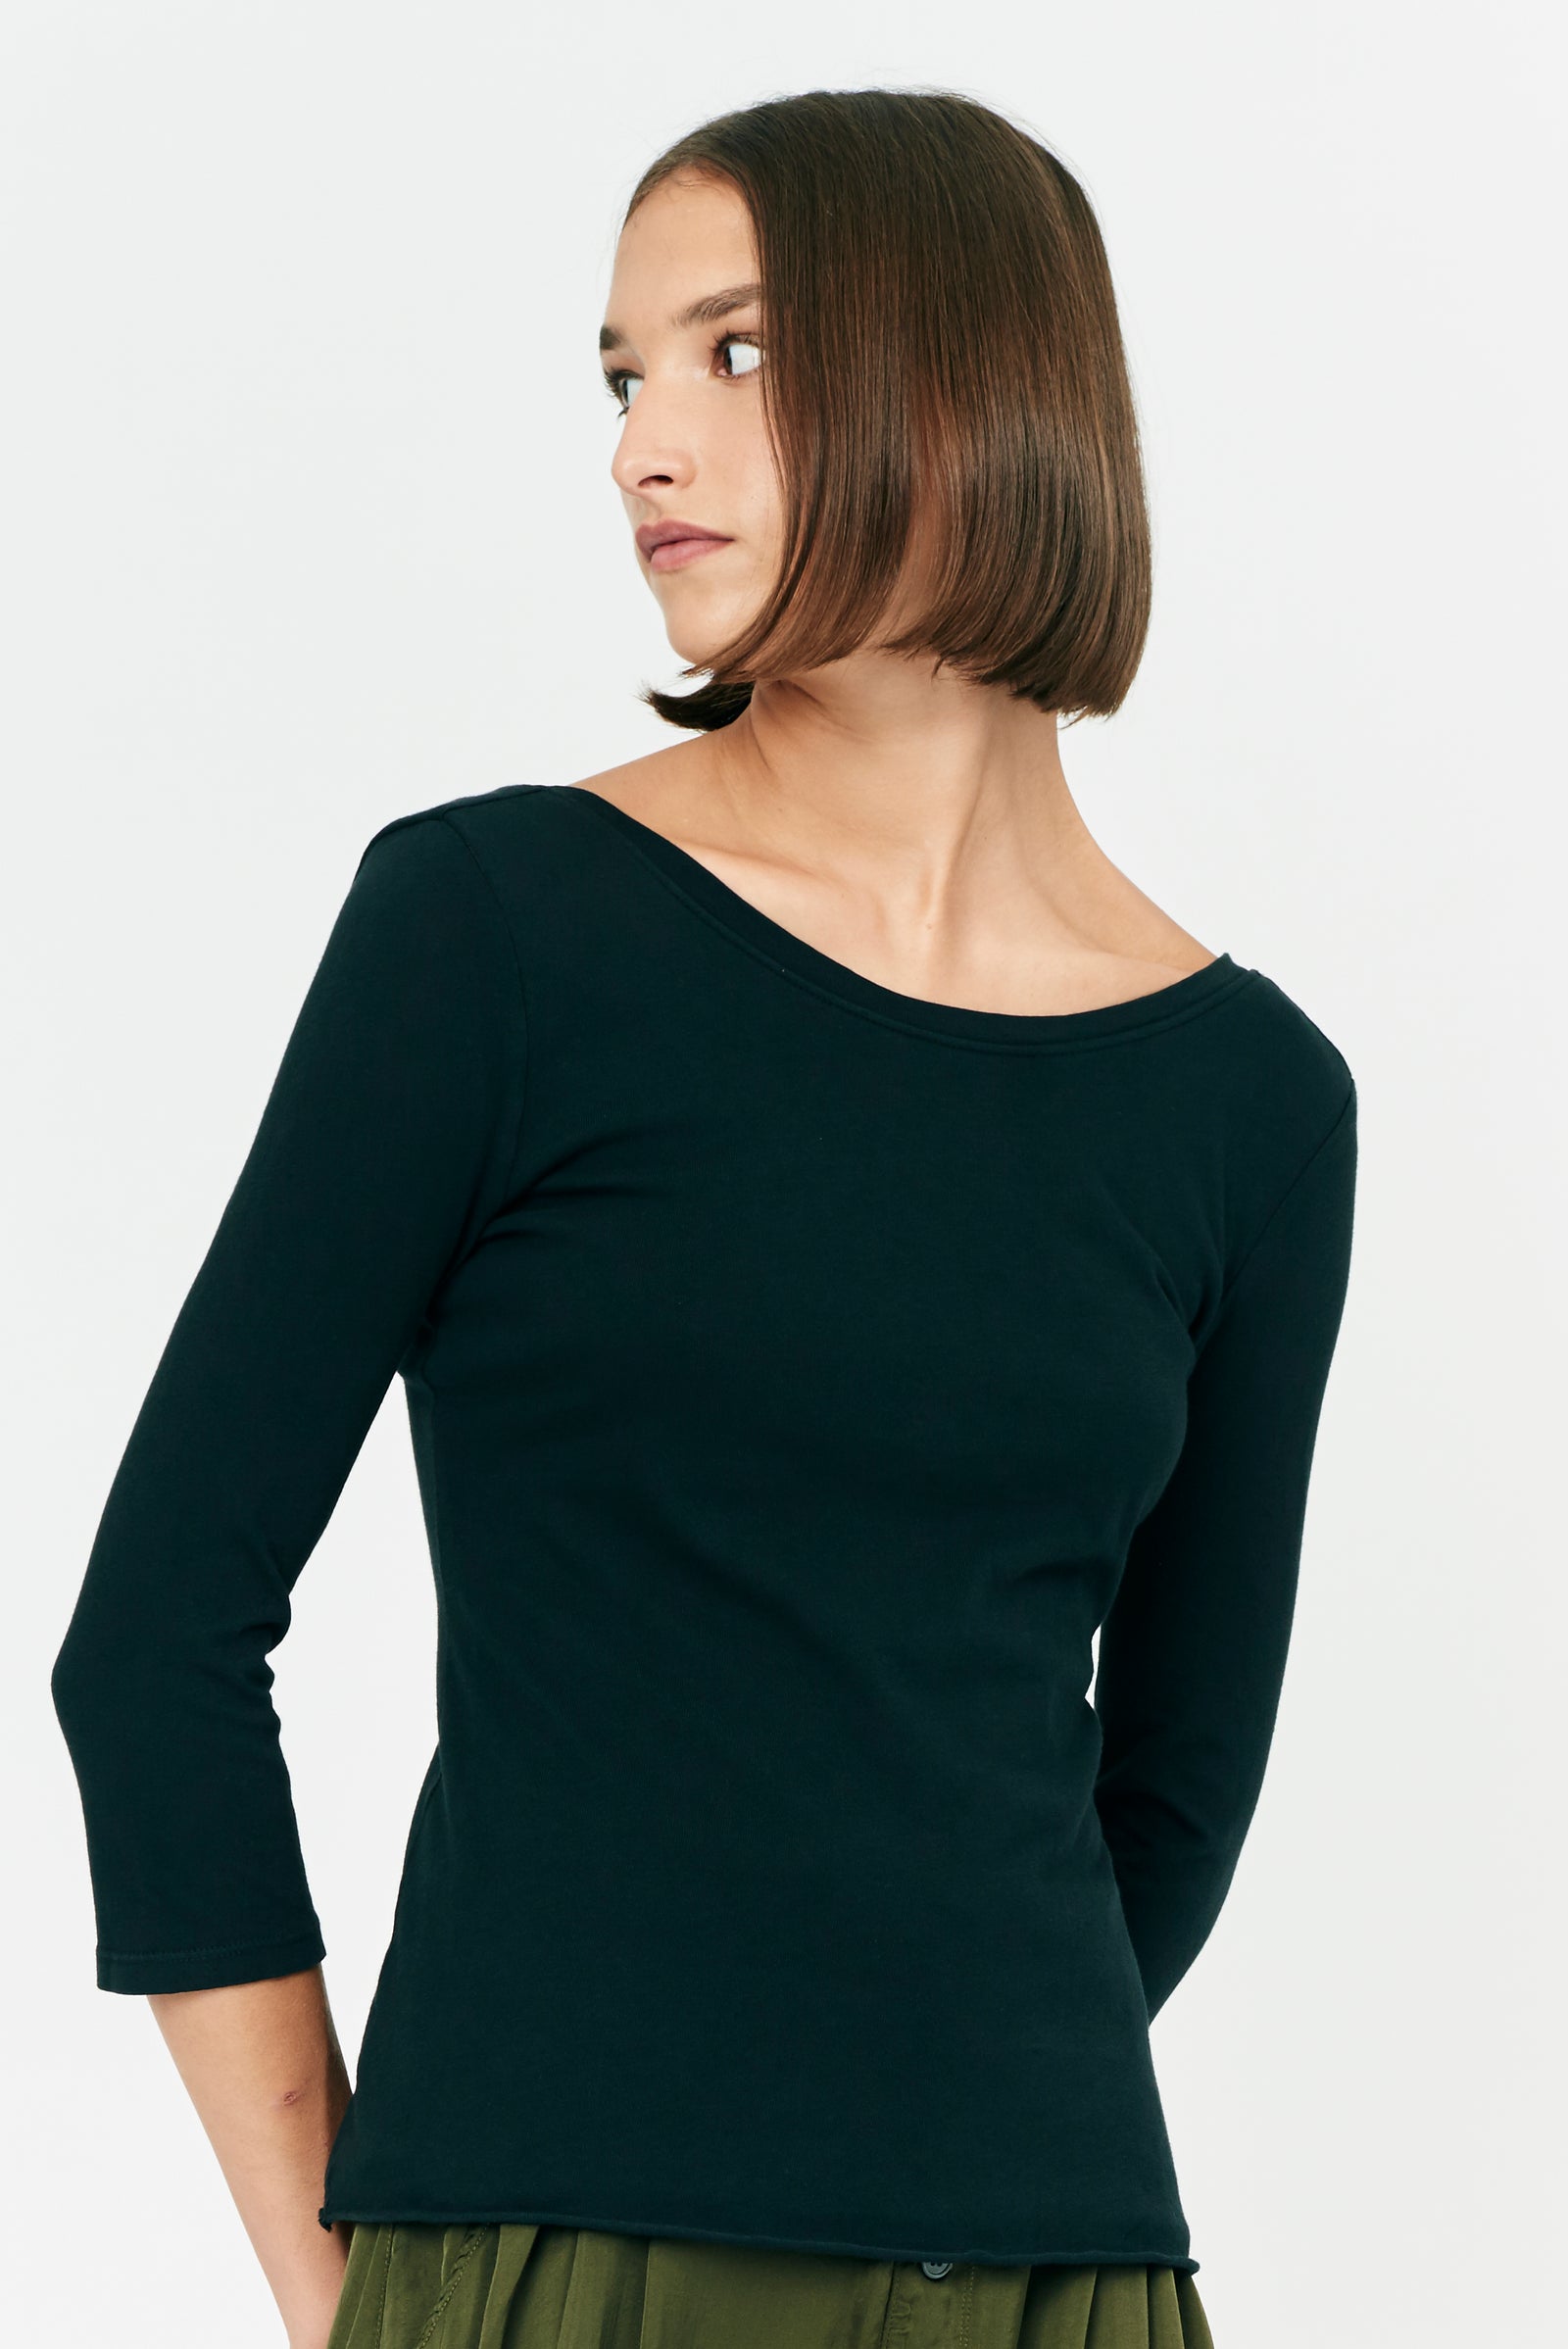 The Black See Through Double Layers Shirt: Women's Sheer Long Sleeve, Layering  Top - Black - Tops